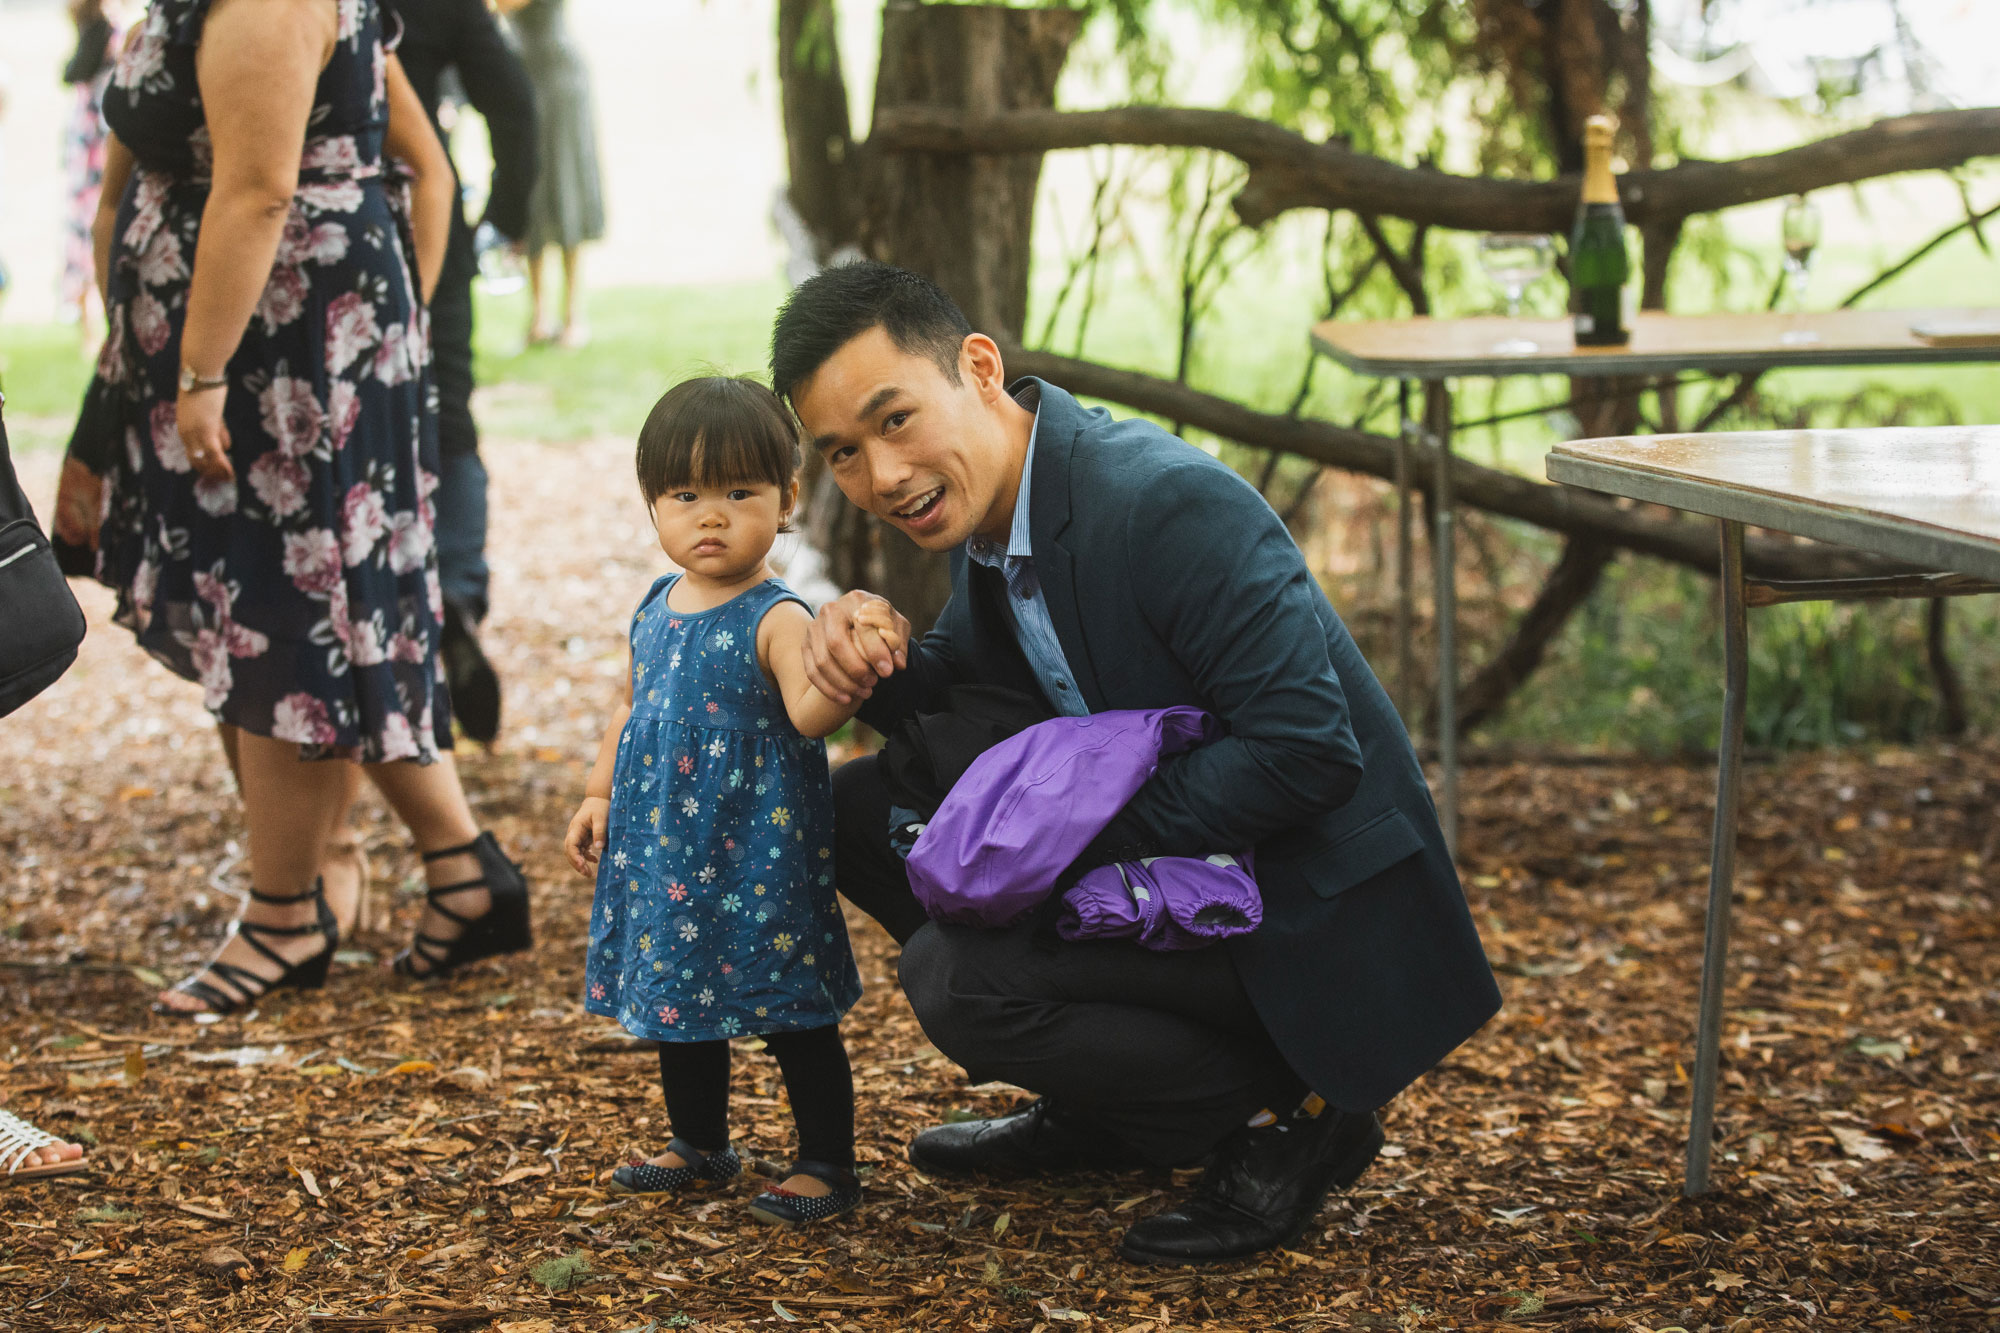 auckland waterfall farm wedding guest and child